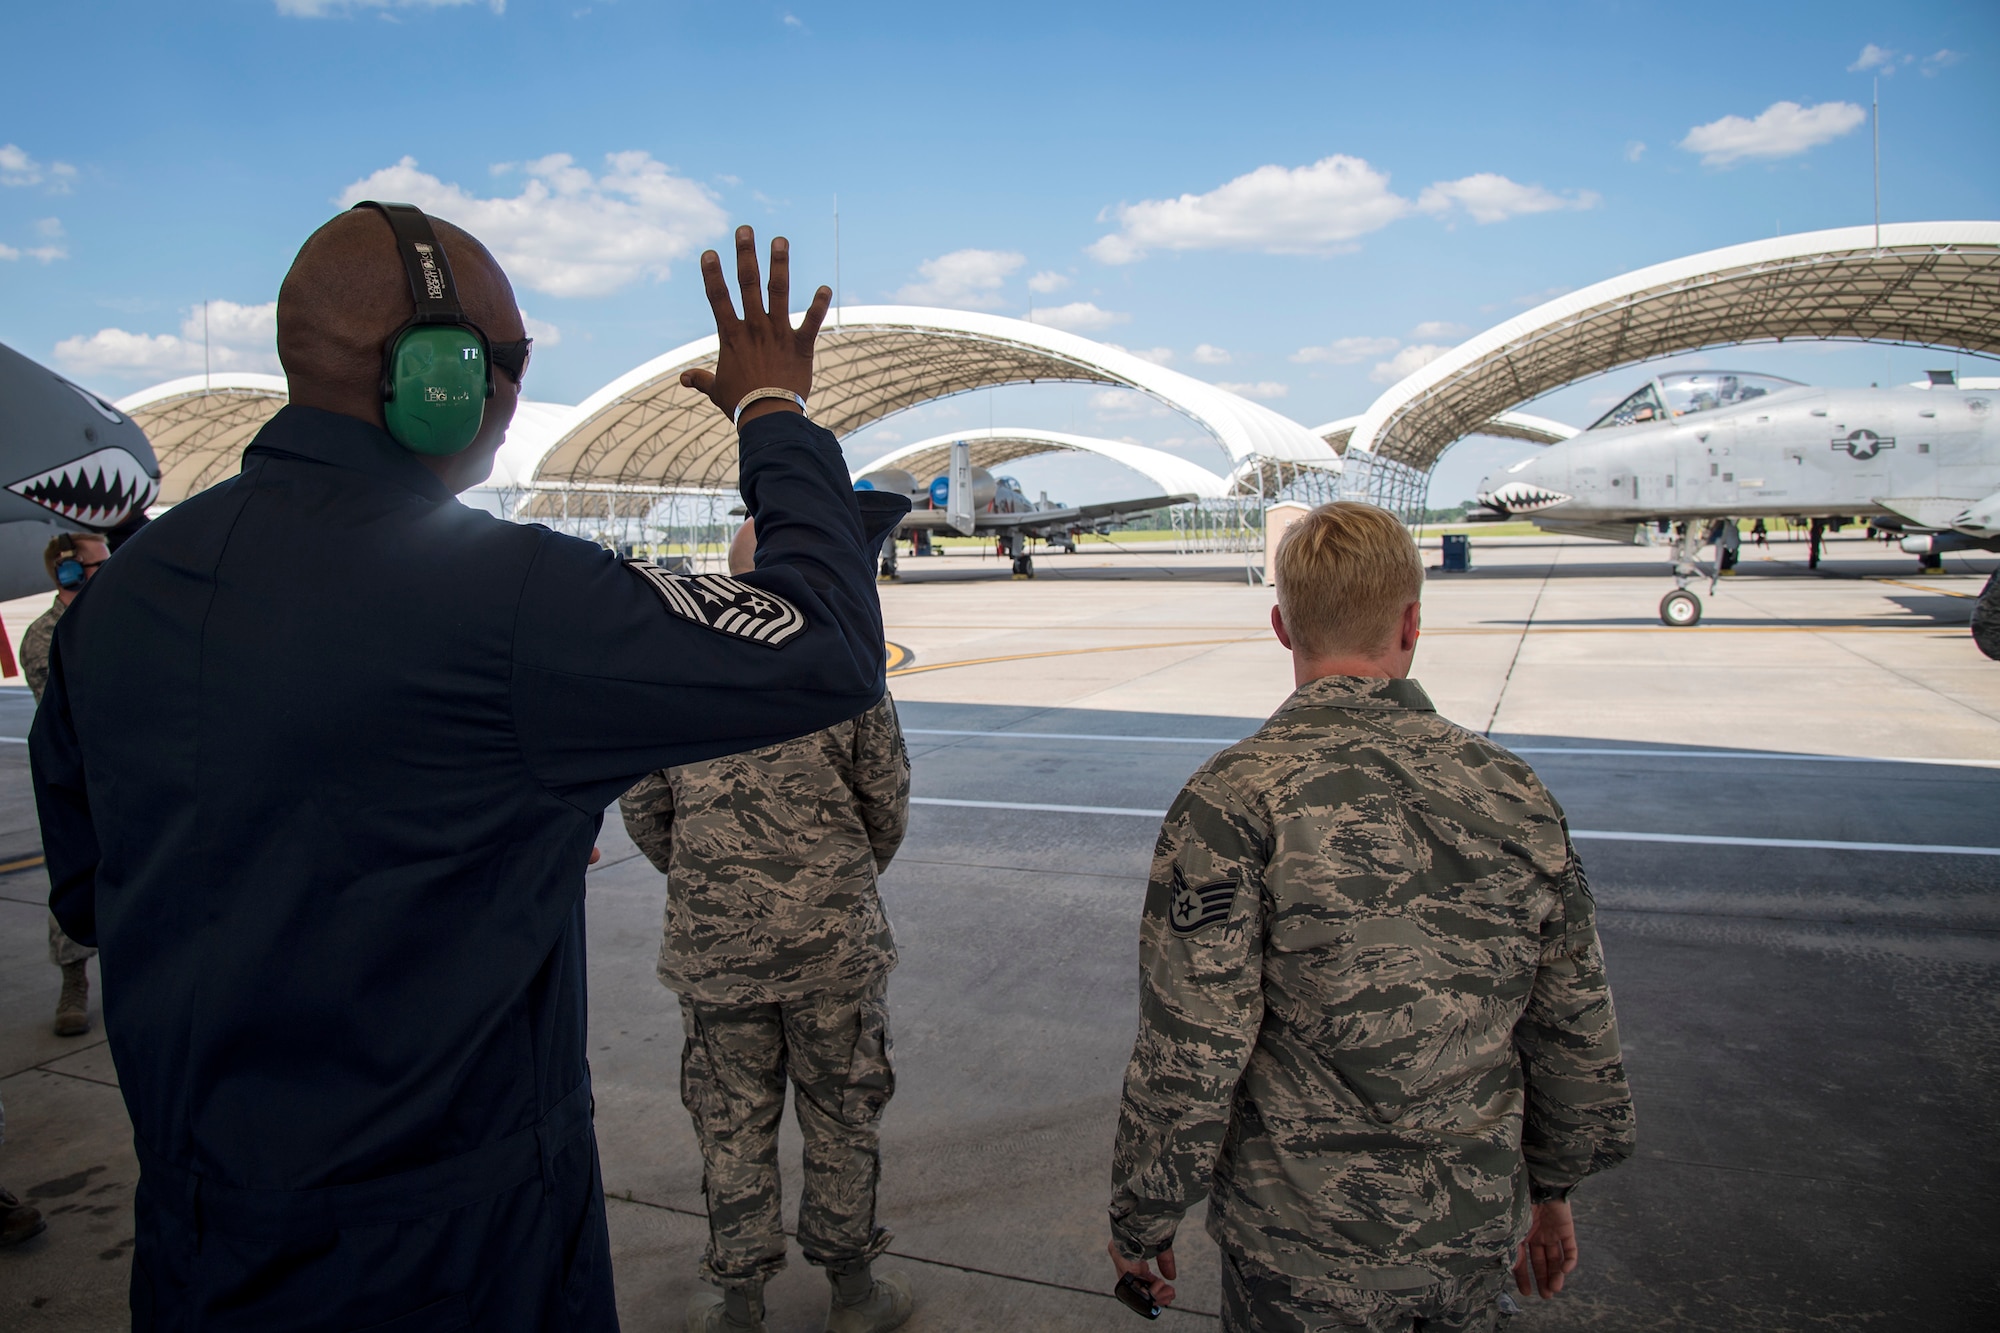 Chief Master Sgt. James Allen, 23d Wing command chief, rear, waves at an A-10C Thunderbolt II pilot during an immersion tour, July 10, 2018, at Moody Air Force Base, Ga. Allen toured the 23d Aircraft Maintenance Squadron (AMXS) to build rapport and experience the day to day operations of maintenance Airmen. Throughout his visit, Allen was able to speak with Airmen and hear their opinions and ideas behind the continued success of the AMXS. (U.S. Air Force photo by Airman 1st Class Eugene Oliver)